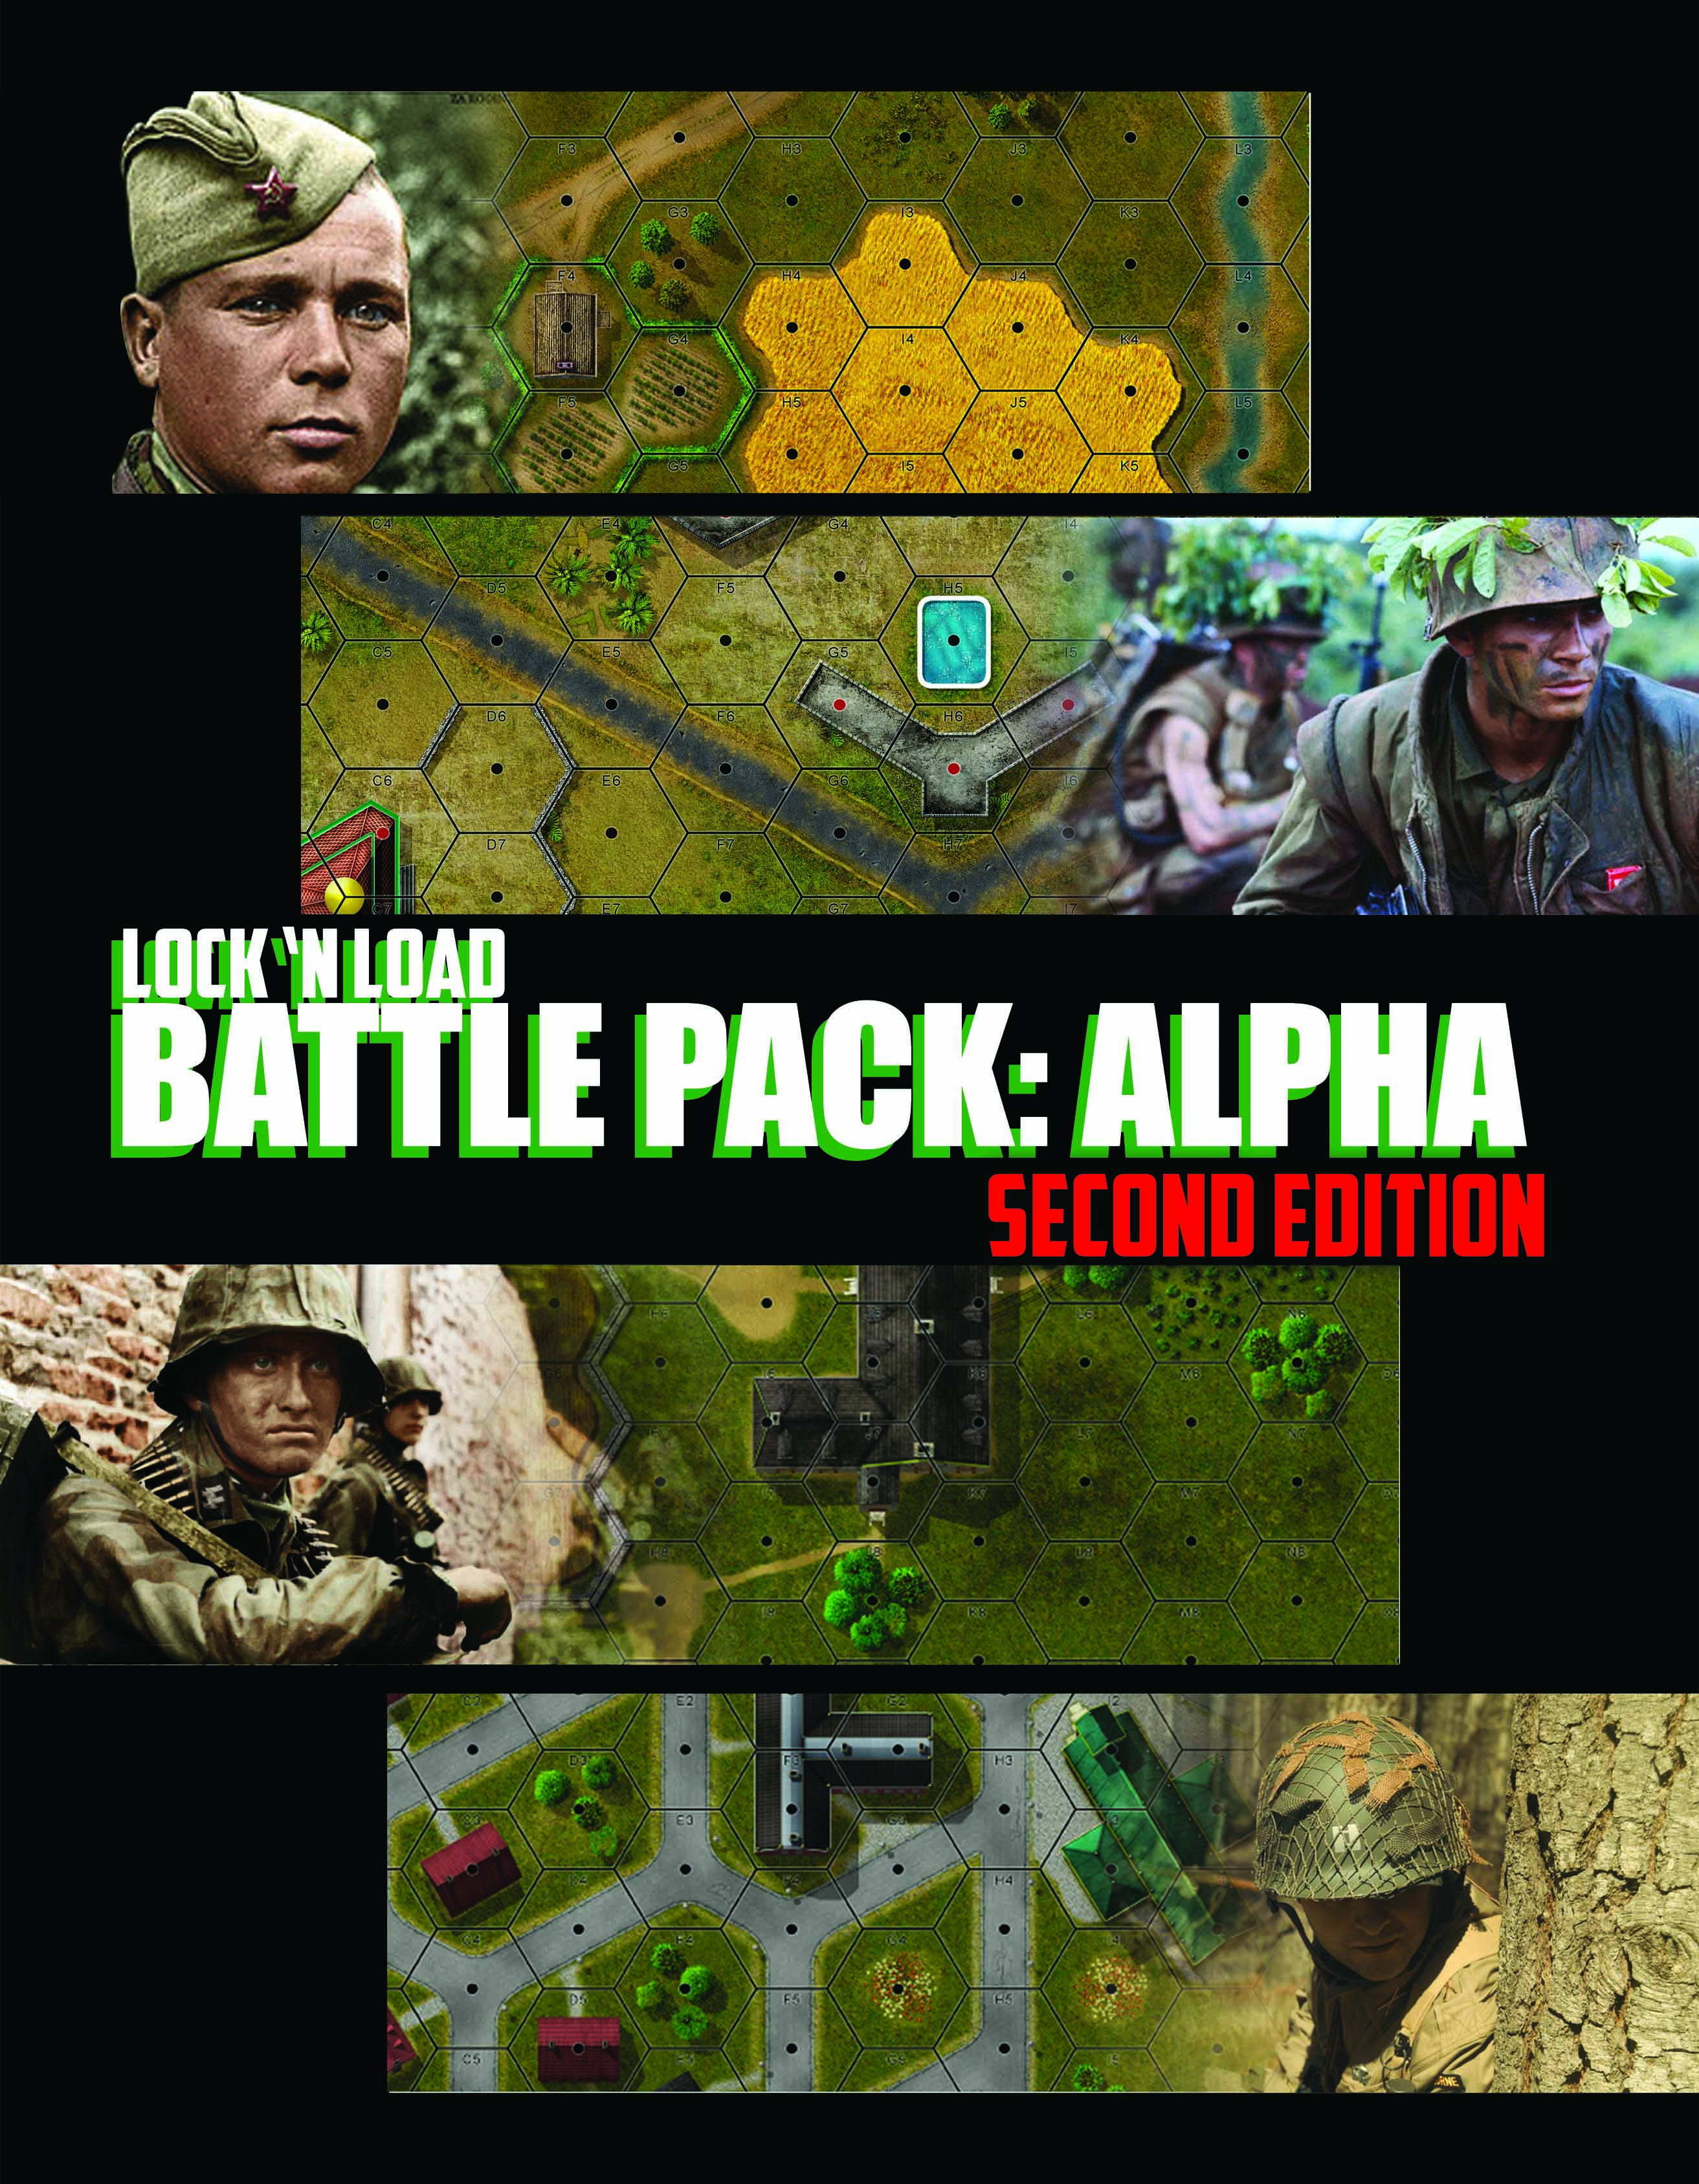 Battle Pack: Alpha Second Edition Cover